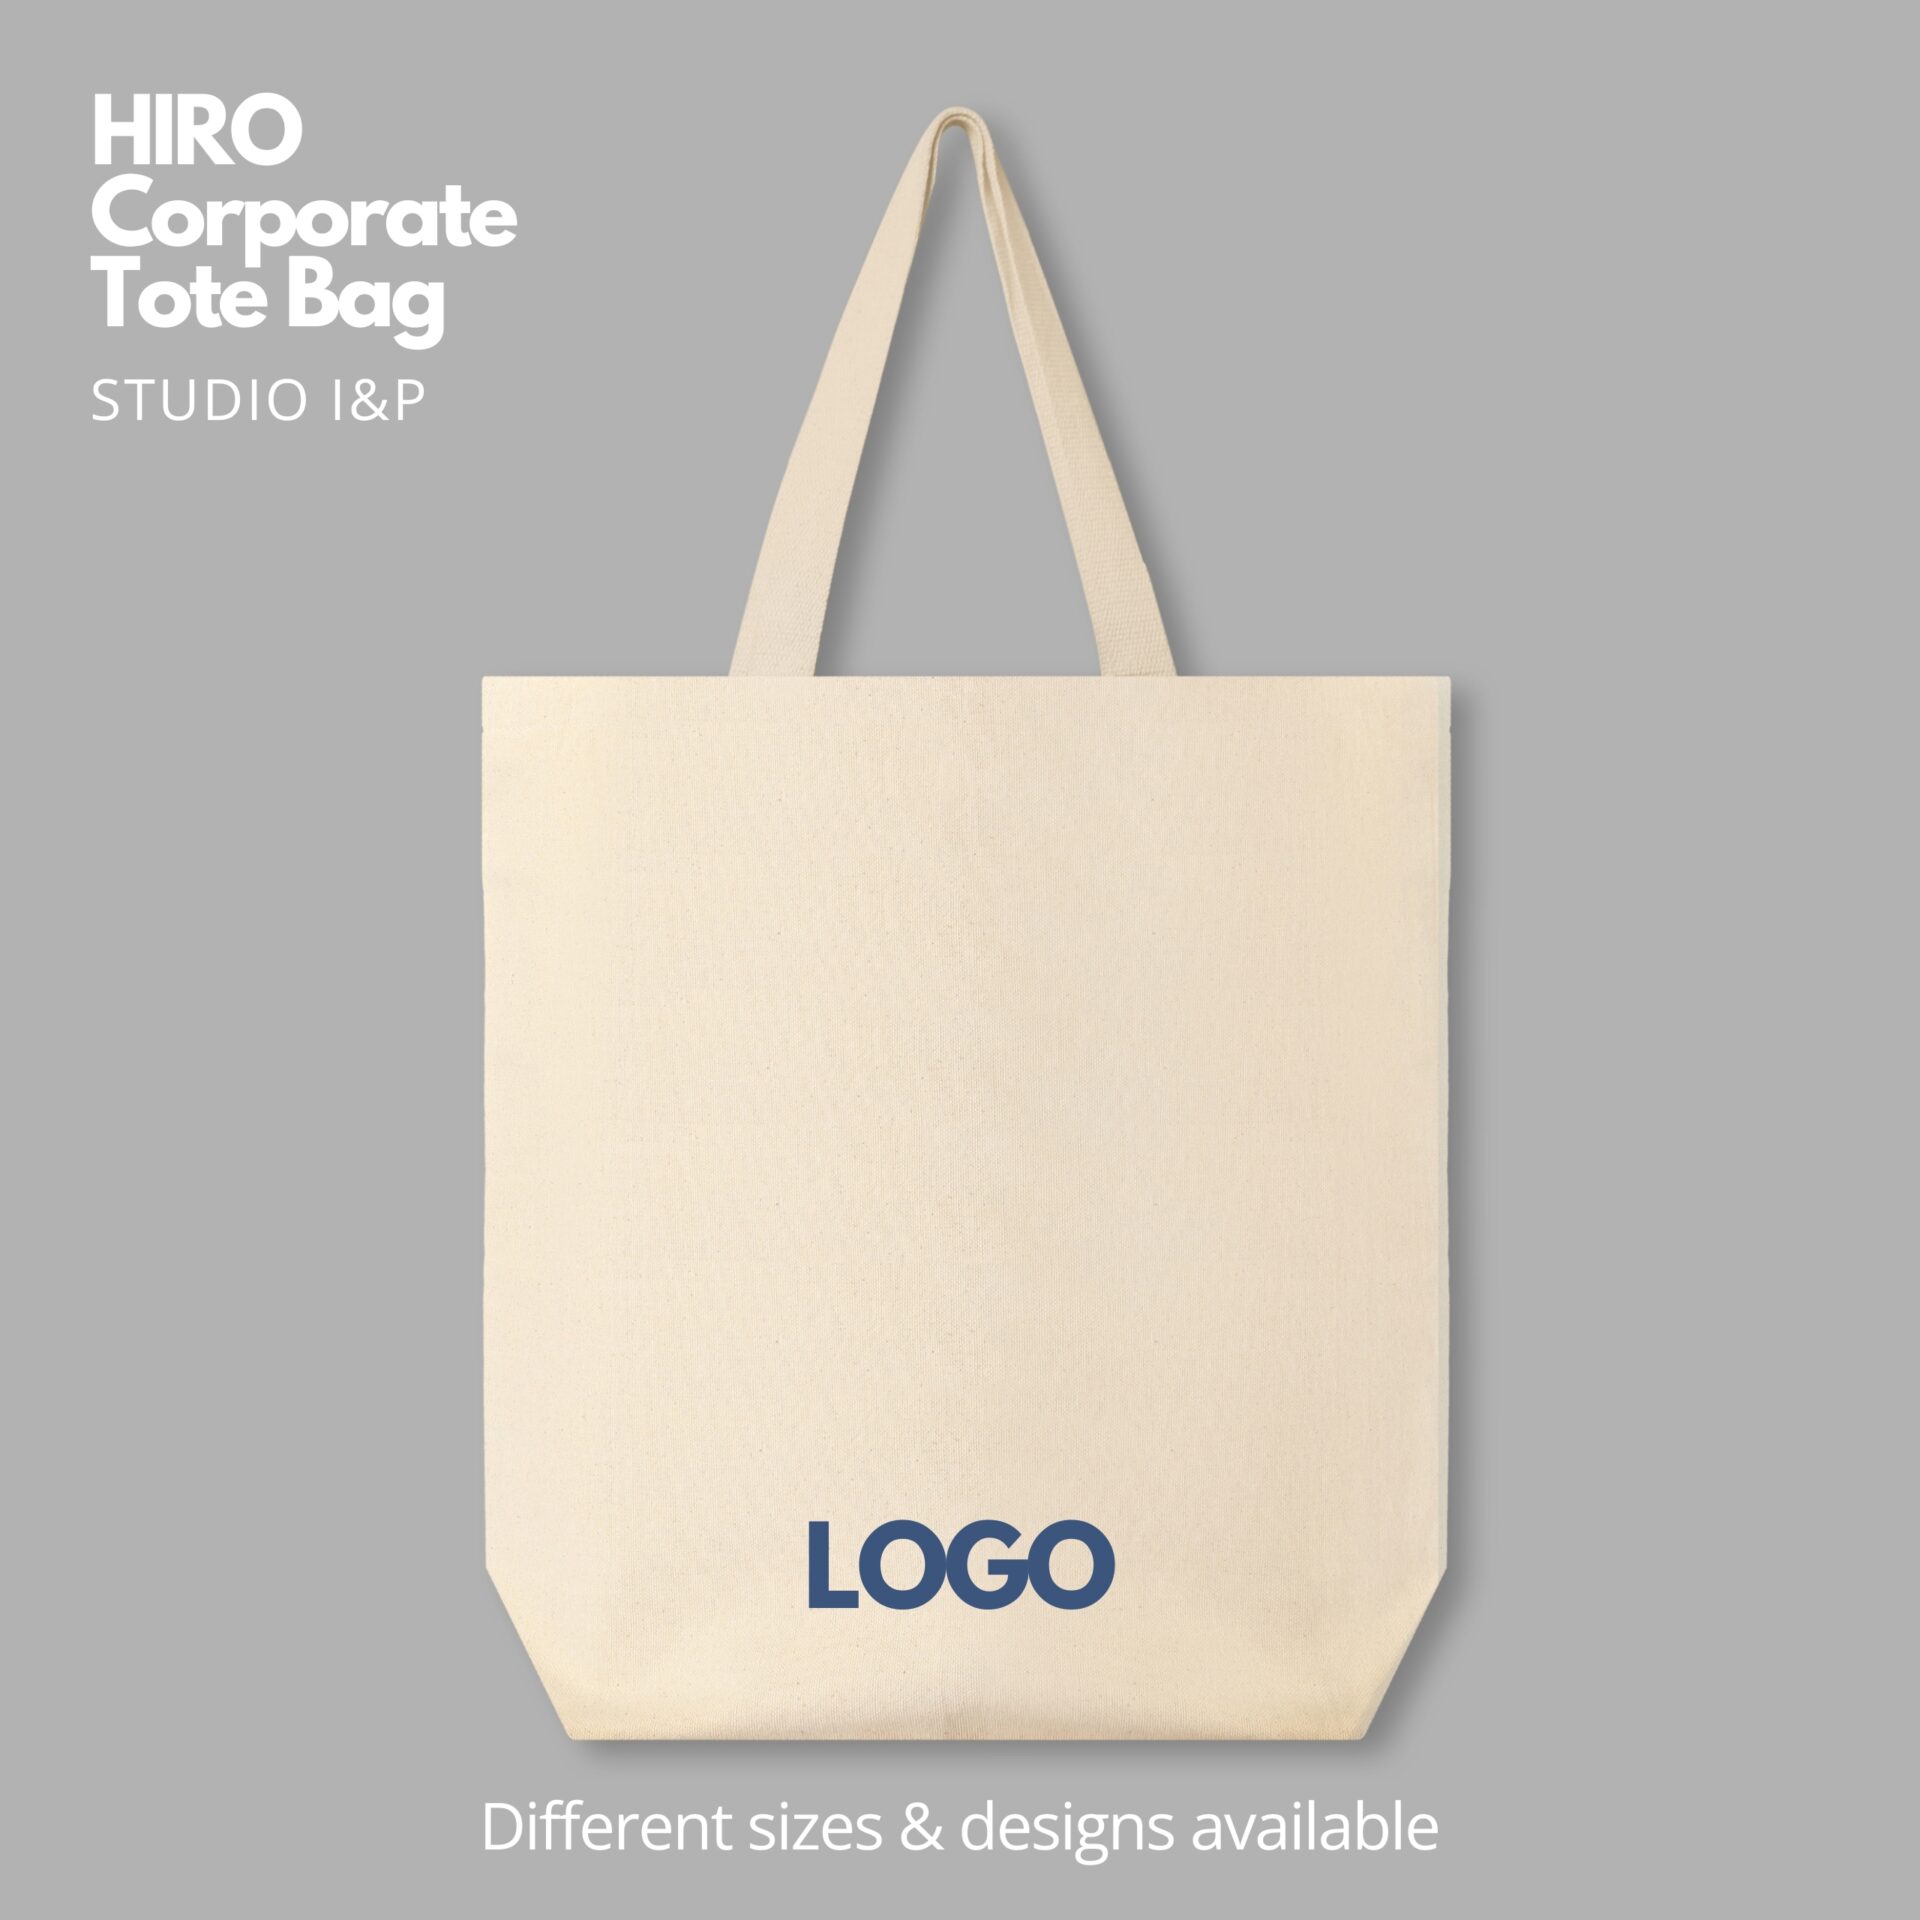 Corporate Gifts Singapore Tote Bag Customised